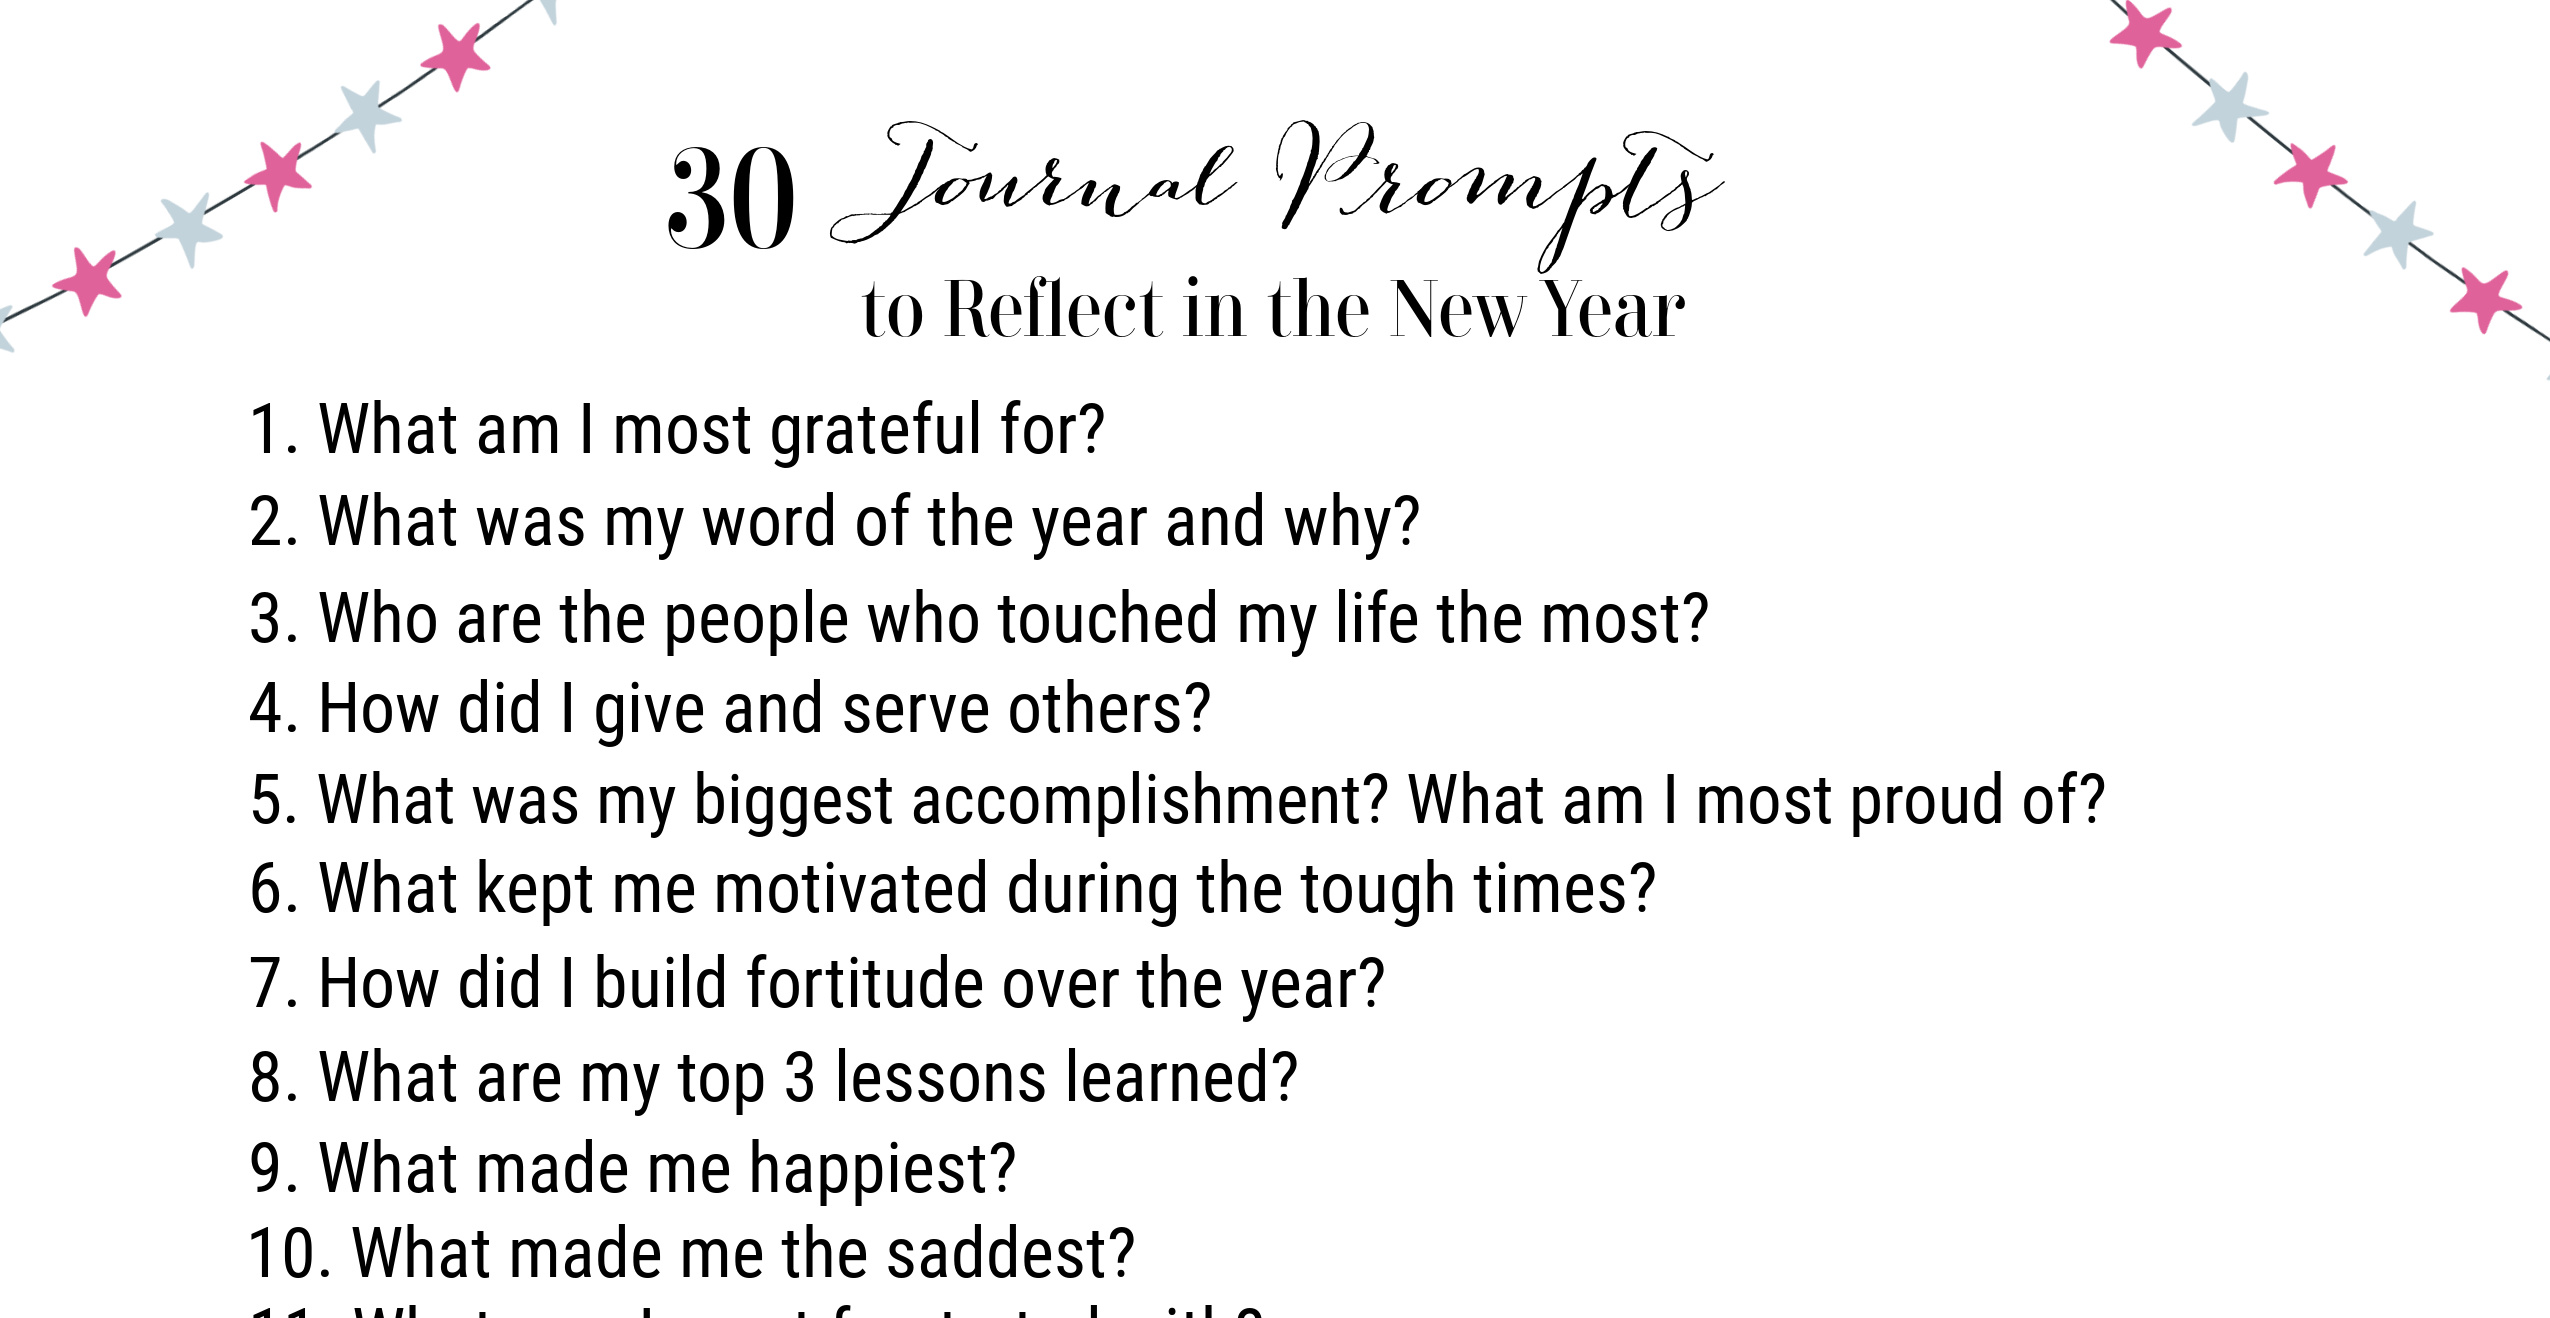 A Year Of Journal Prompts